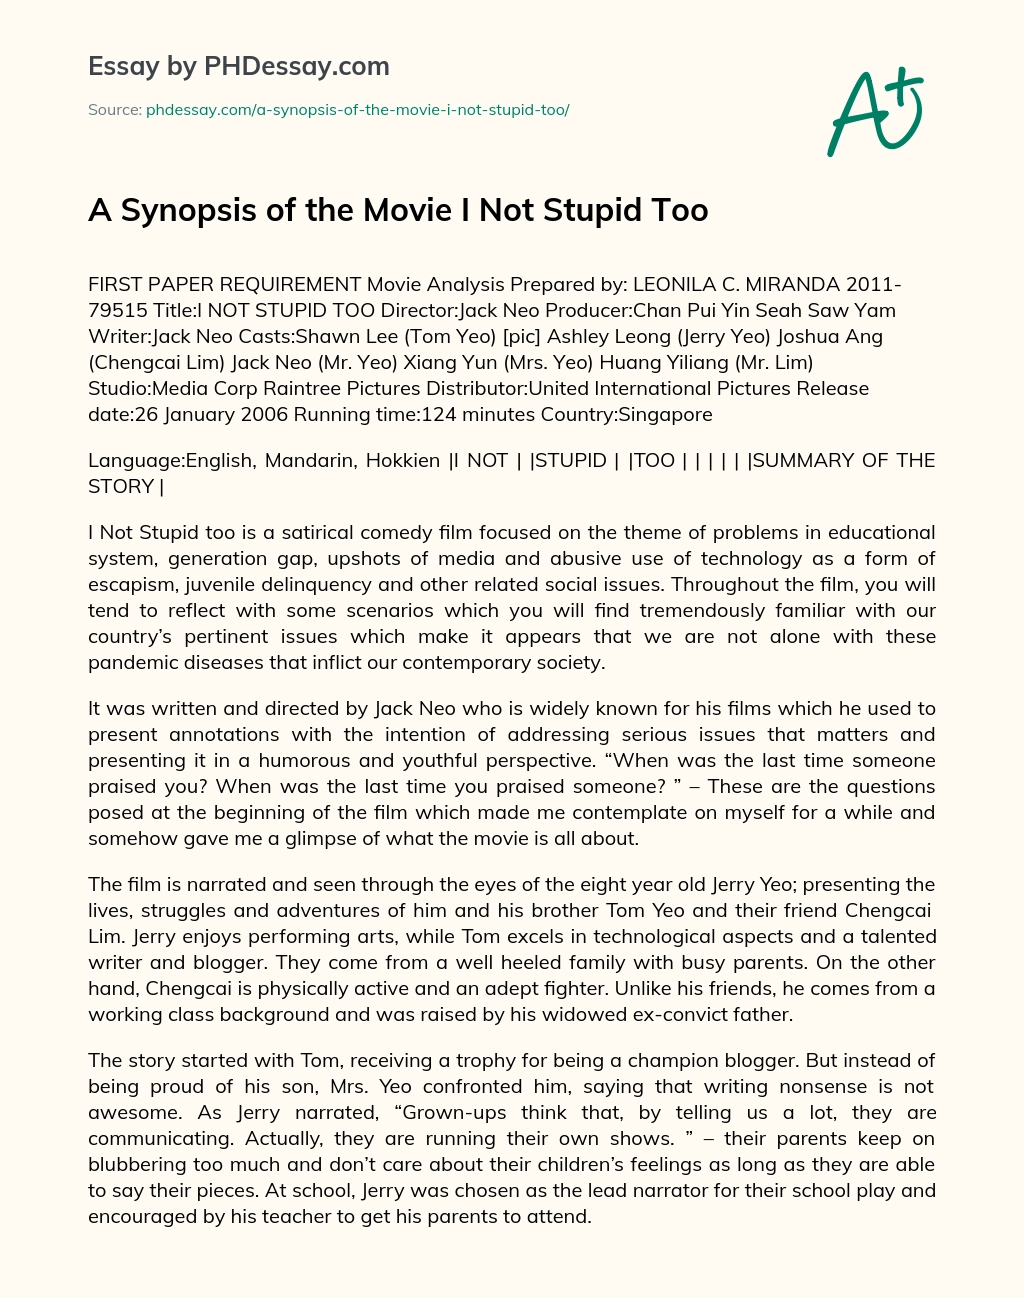 A Synopsis of the Movie I Not Stupid Too essay